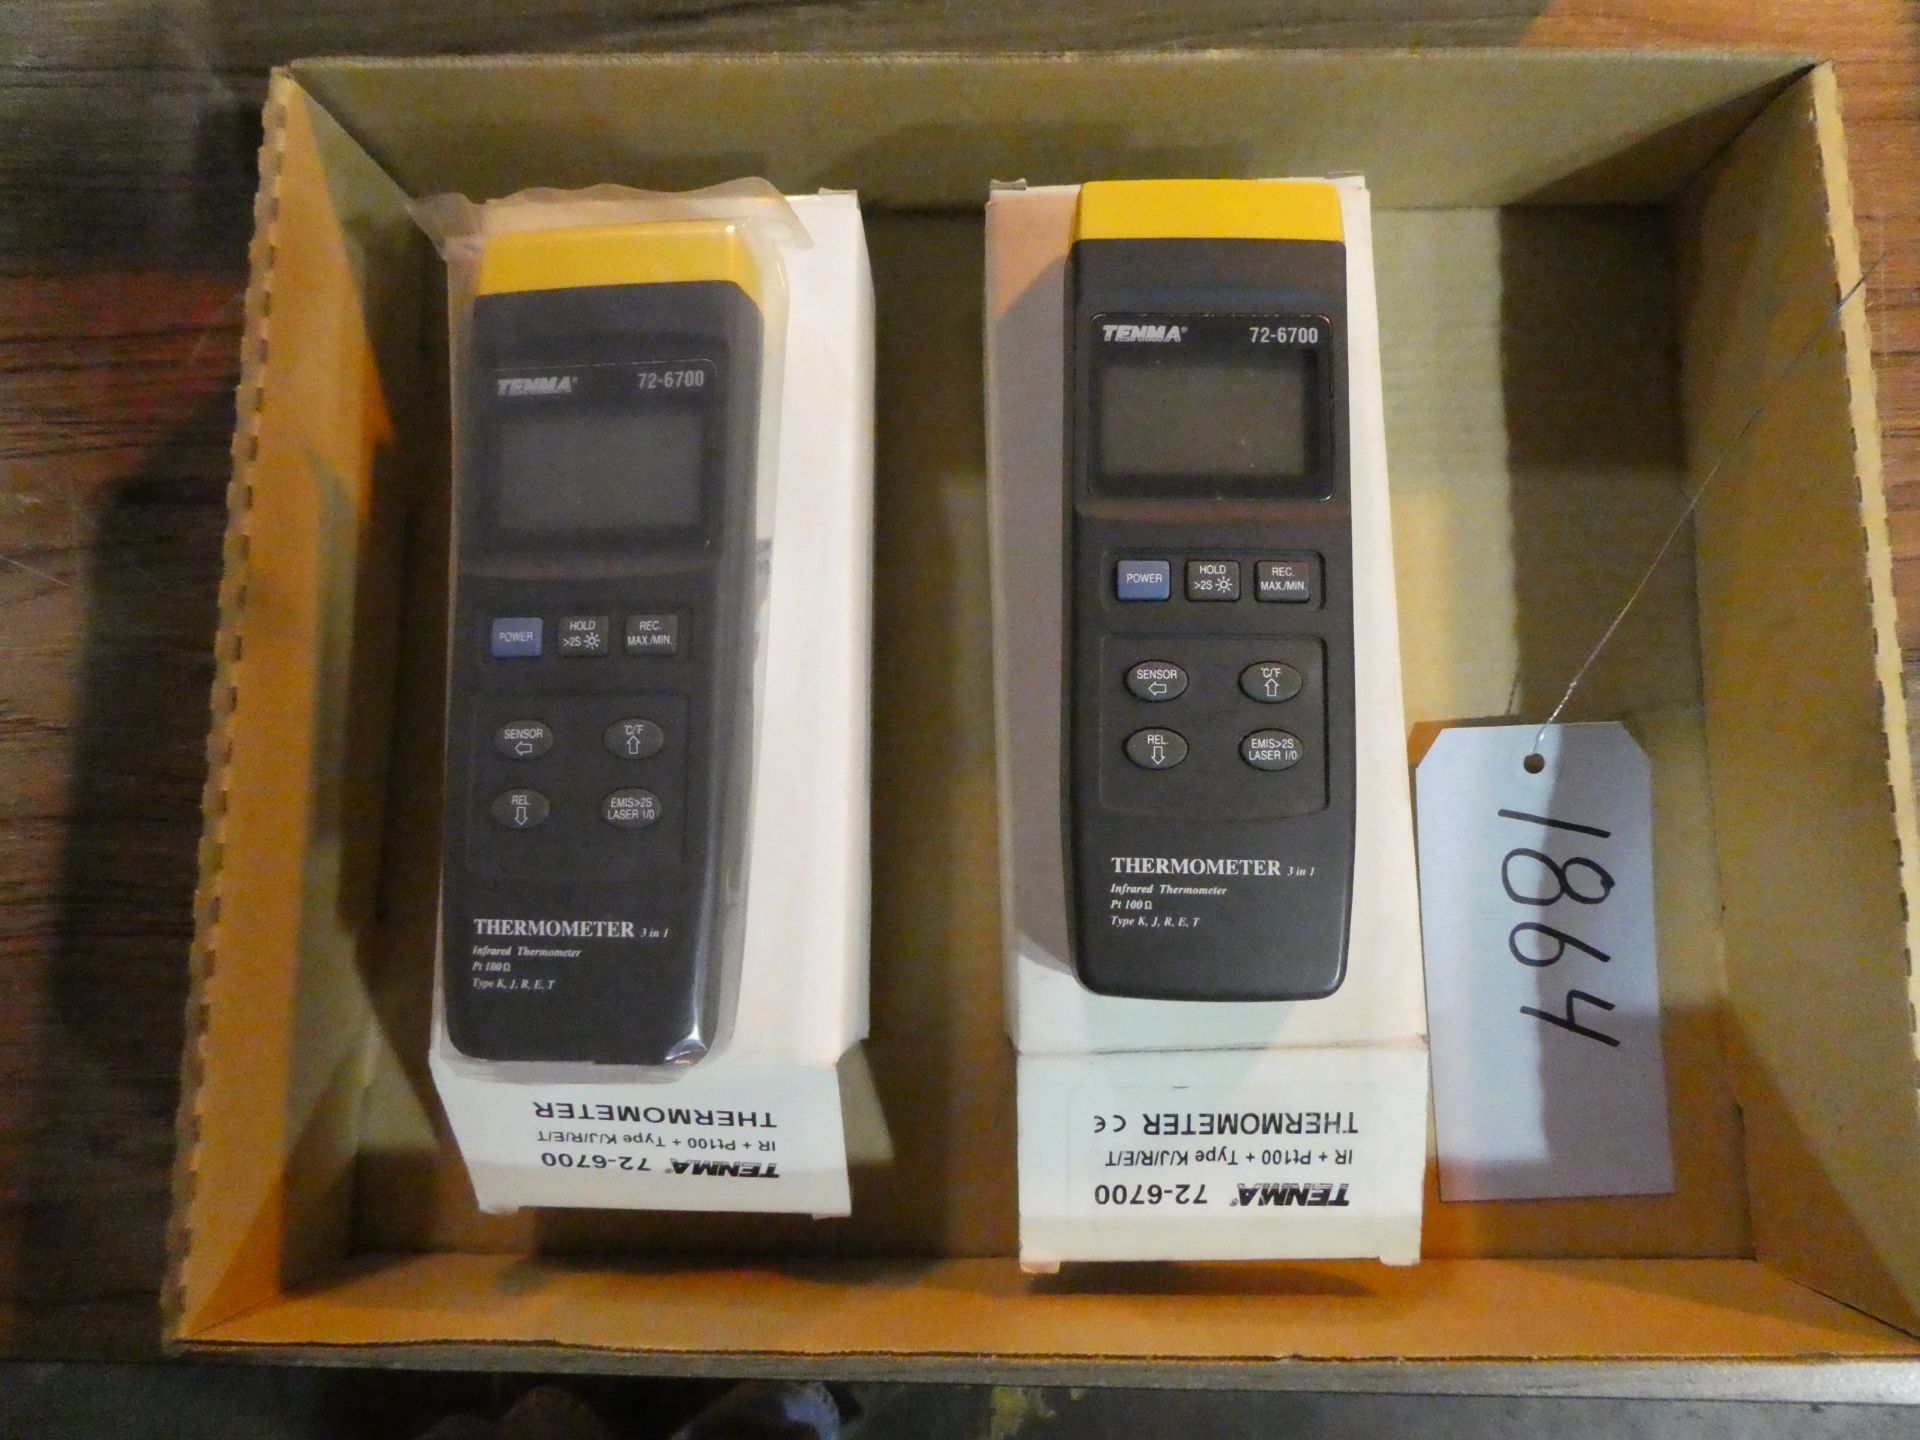 (2) Tenma 72-6700 Infrared Thermometers